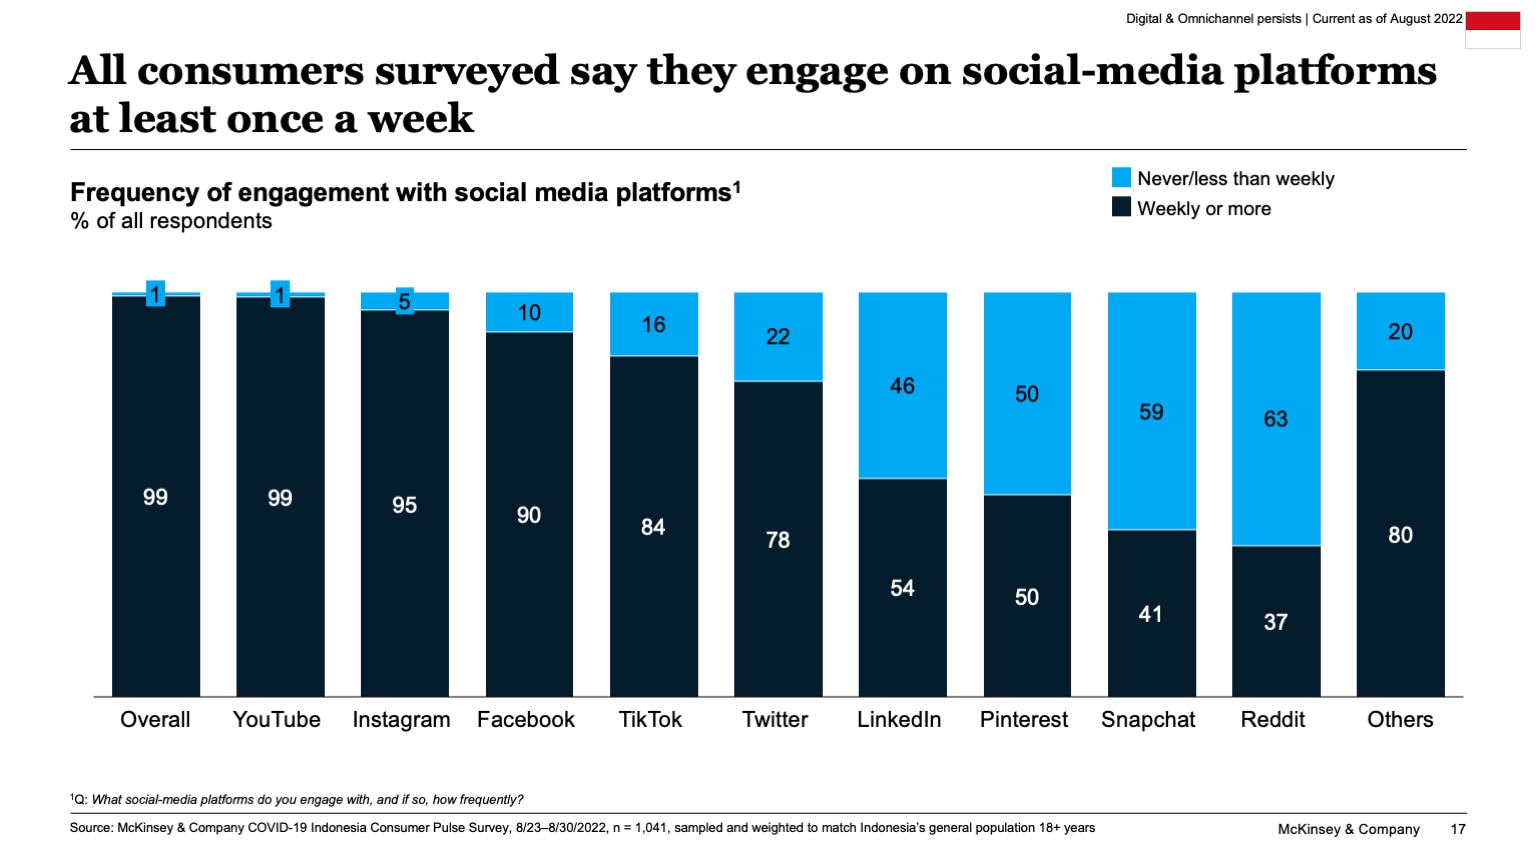 All consumers surveyed say they engage on social-media platforms at least once a week